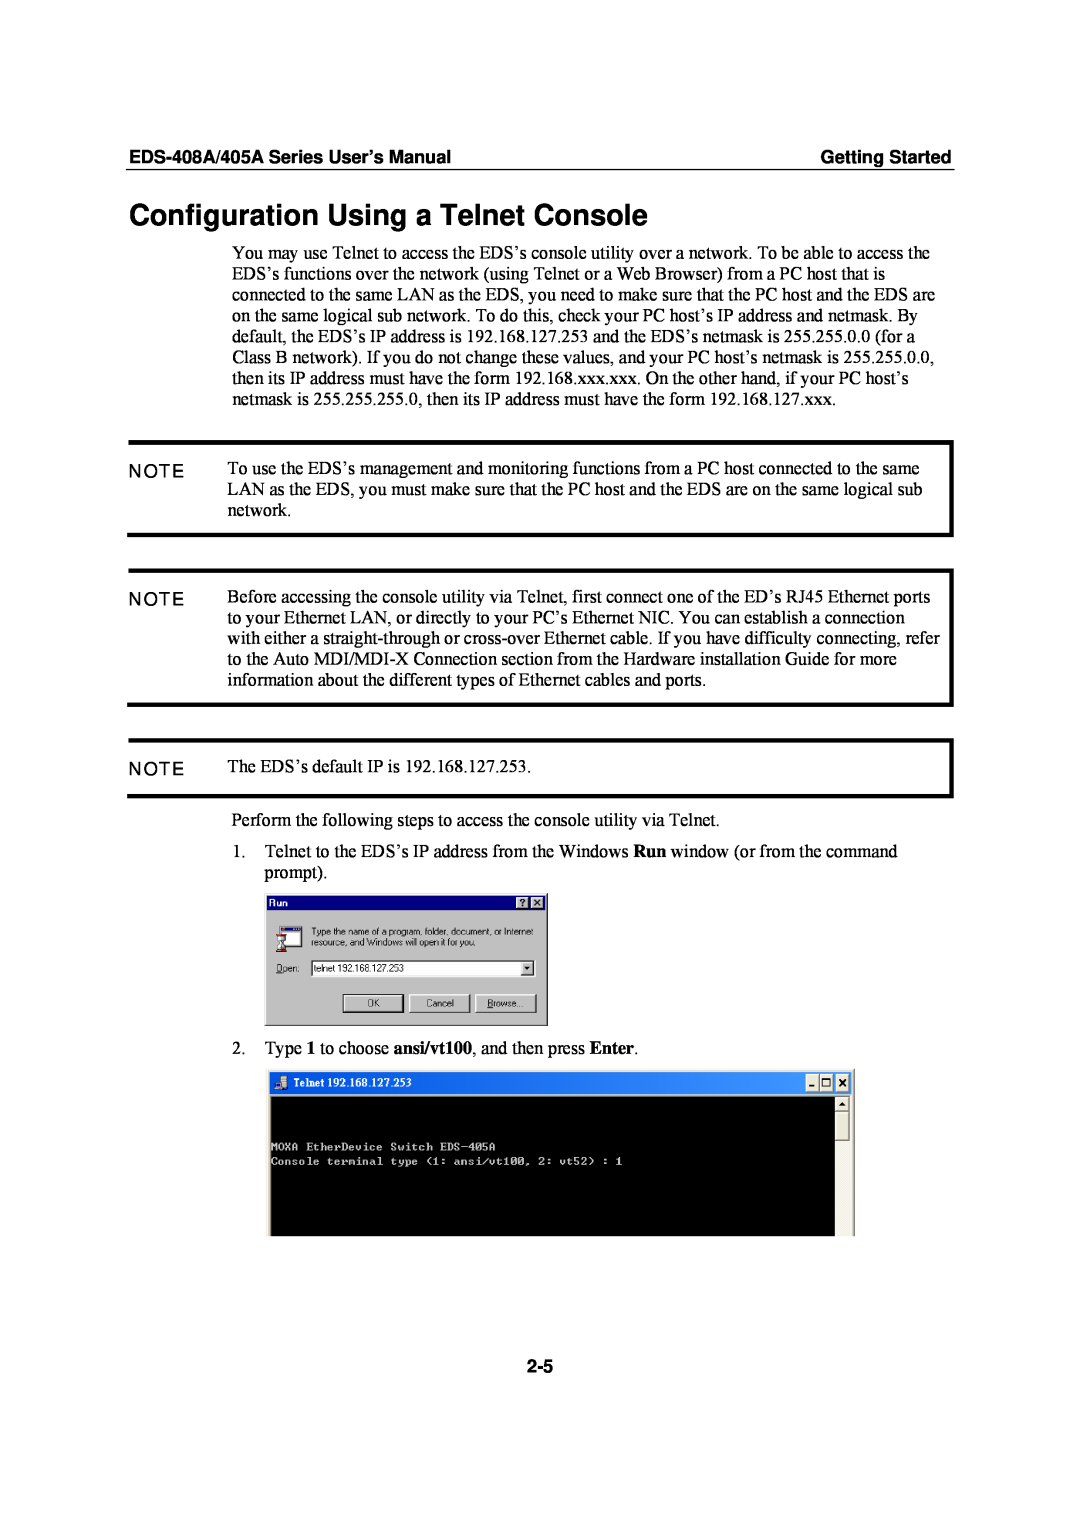 Moxa Technologies EDS-405A Configuration Using a Telnet Console, EDS-408A/405A Series User’s Manual, Getting Started 